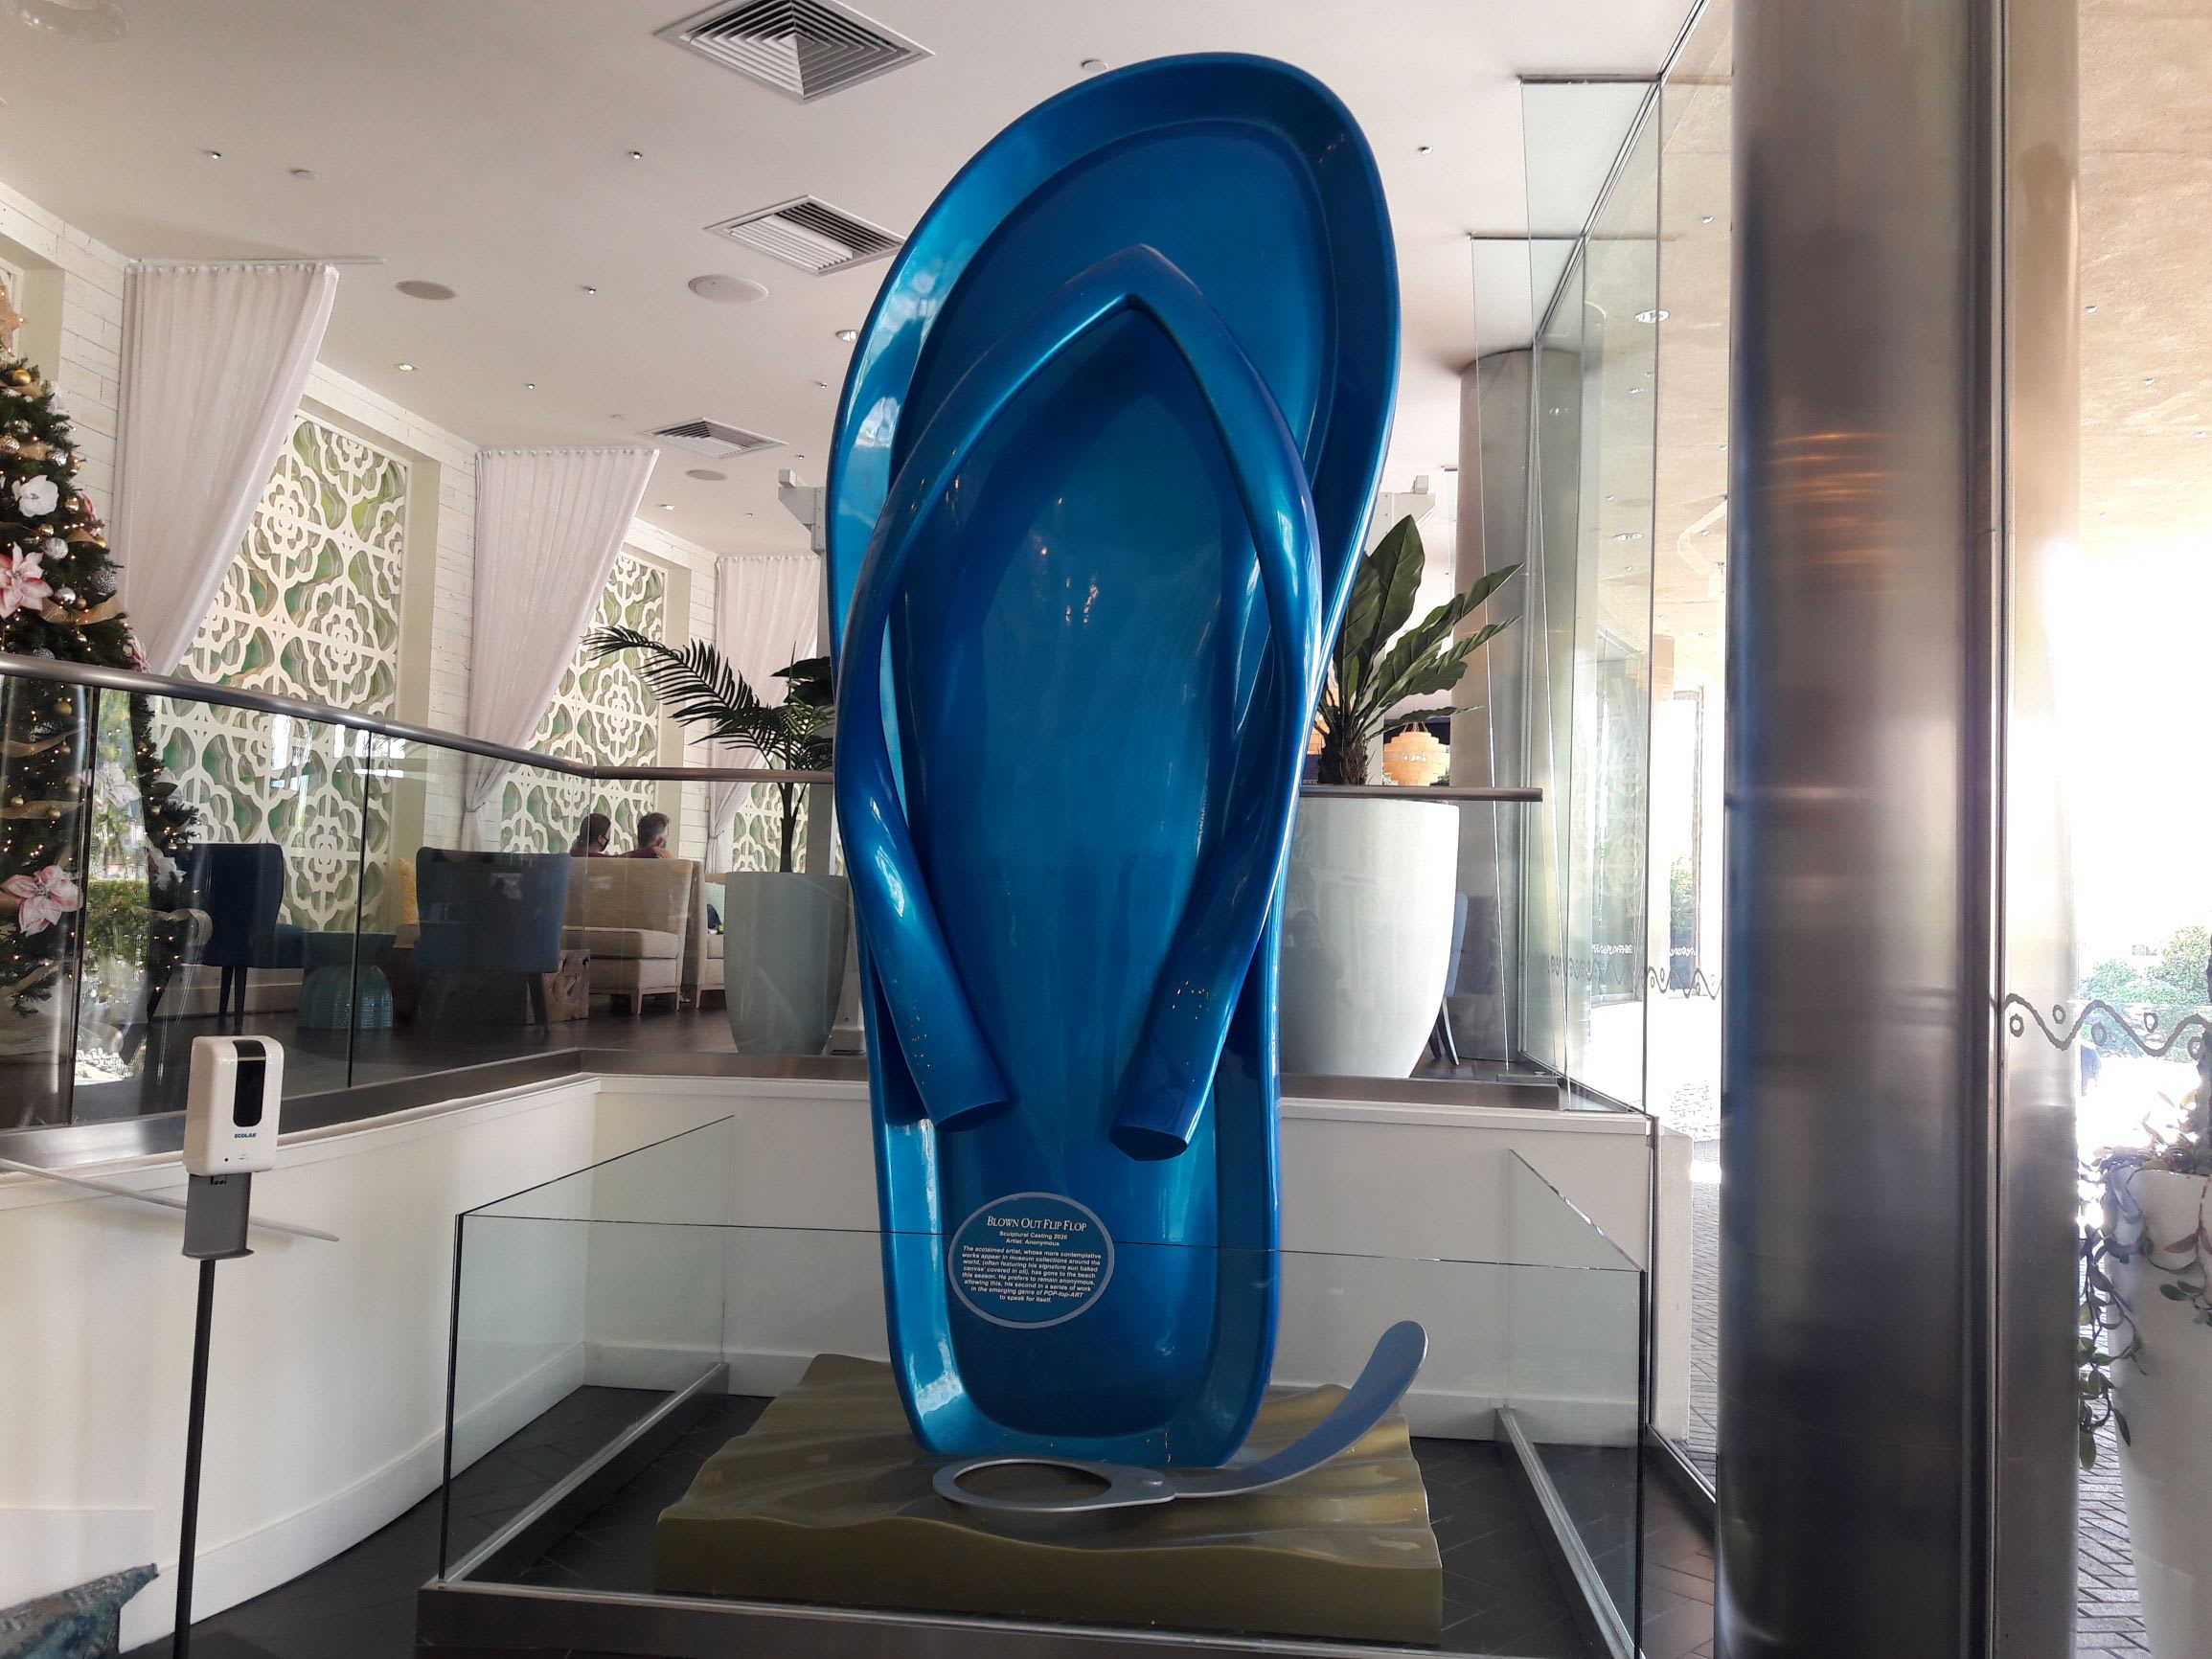 You're welcomed to the resort by the giant flip-flop... "I blew out my flip flop…stepped on a pop top."